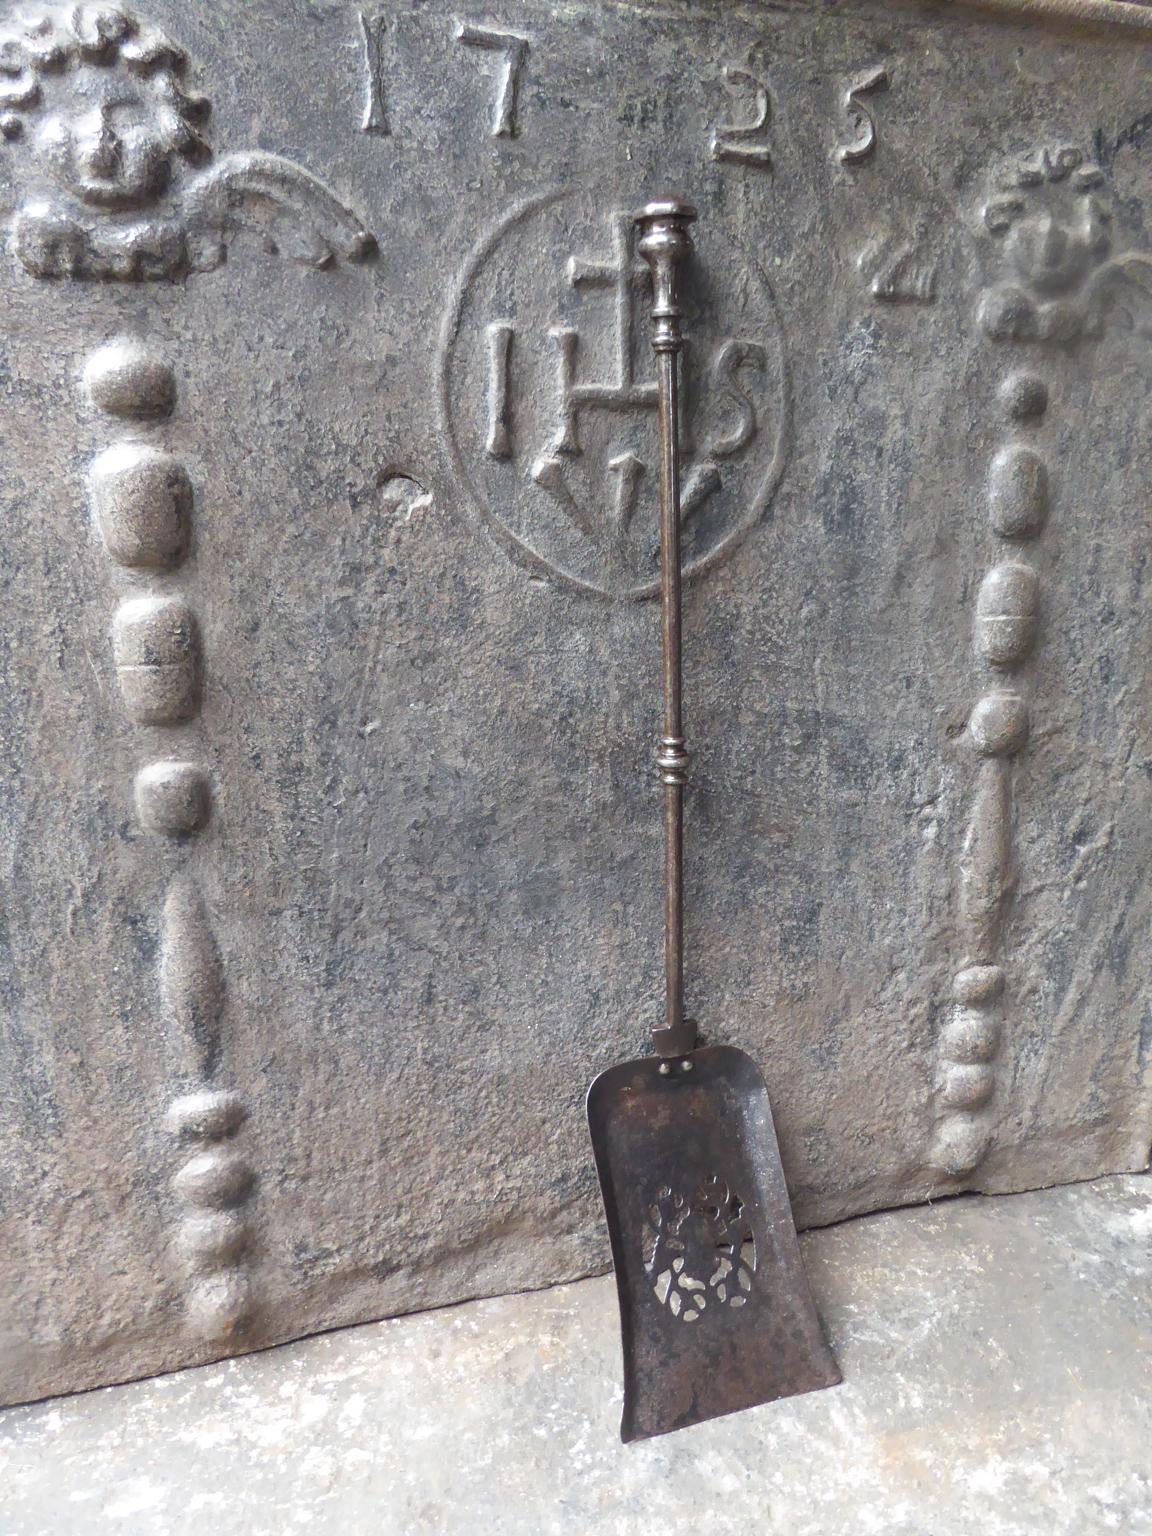 19th century English Victorian fireplace shovel made of wrought iron. The shovel is in a good condition and is fully functional.